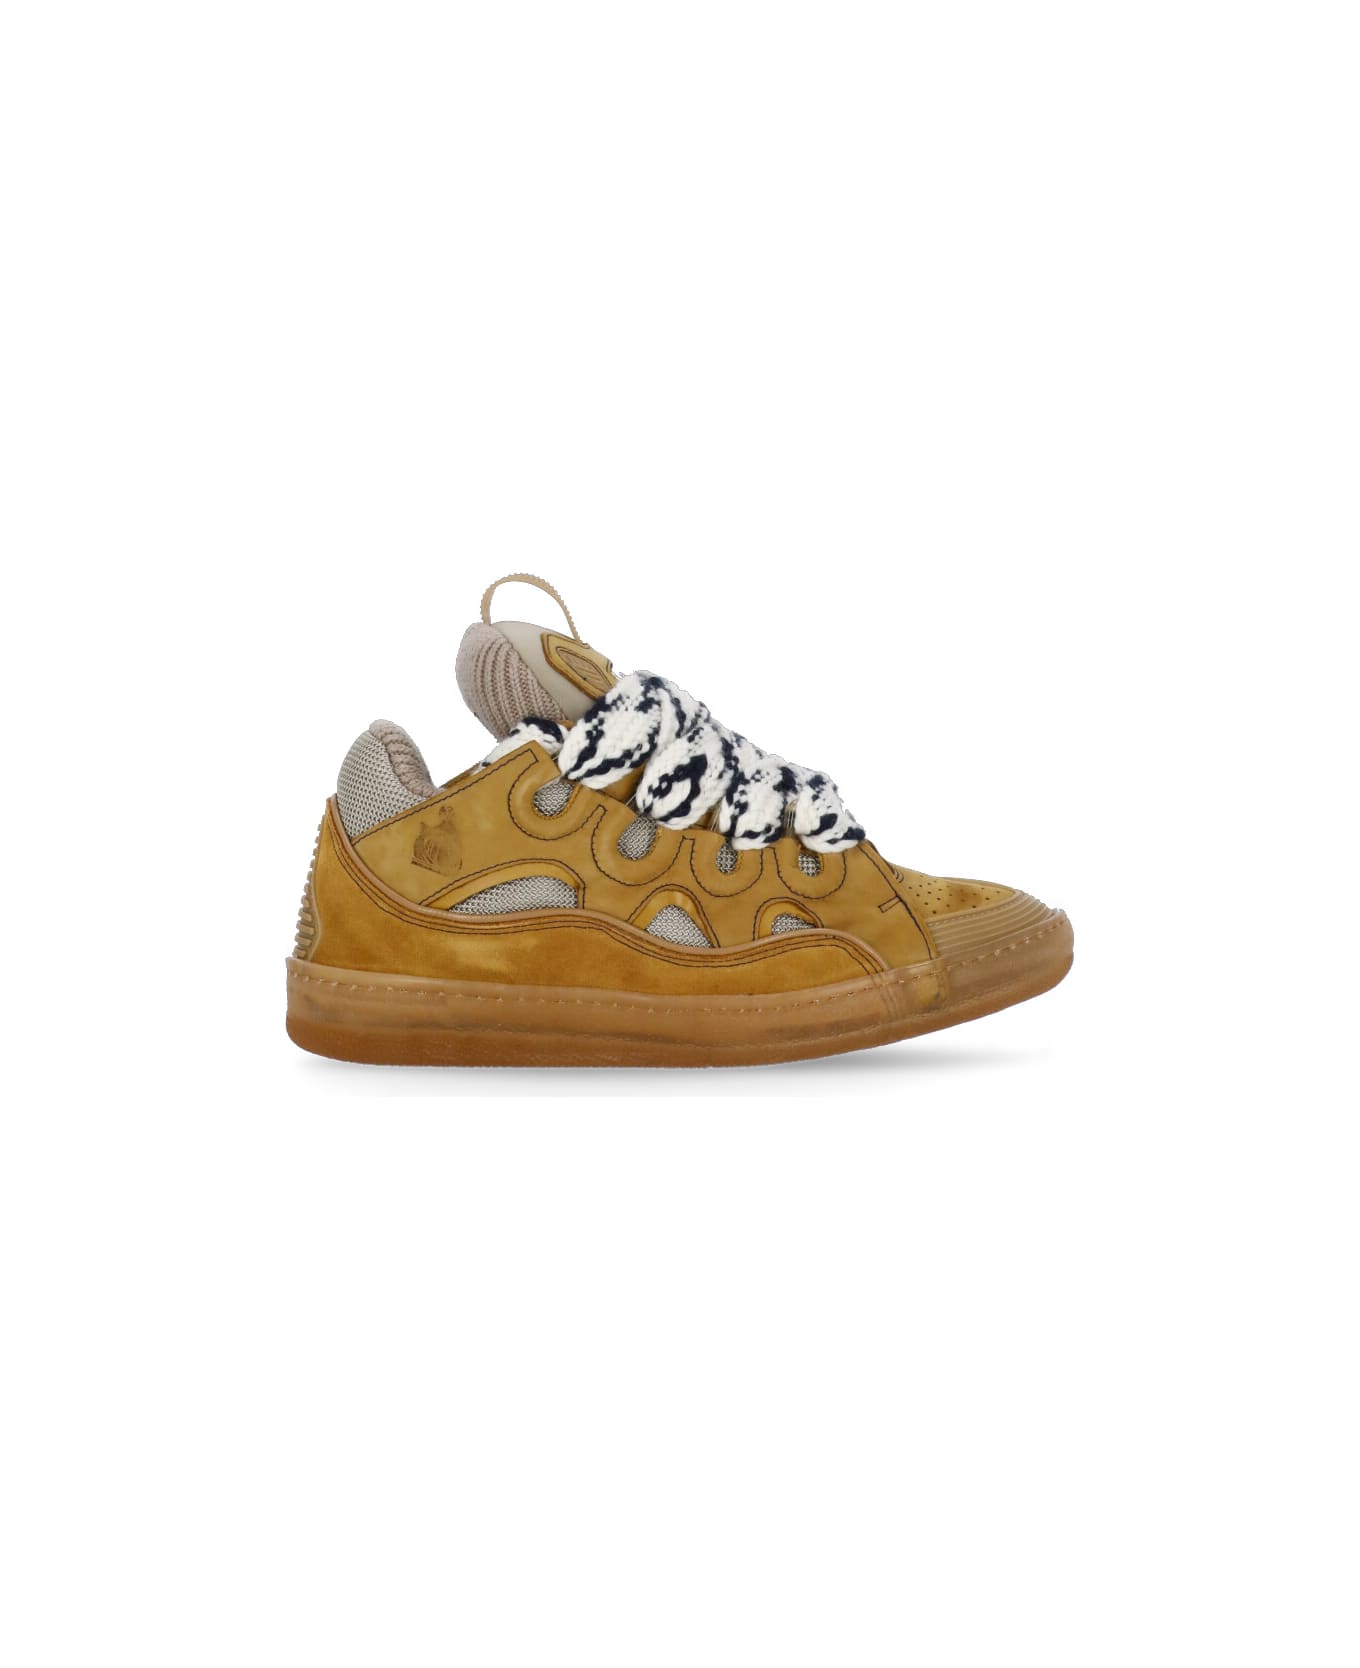 Lanvin Curb Sneakers - Yellow スニーカー